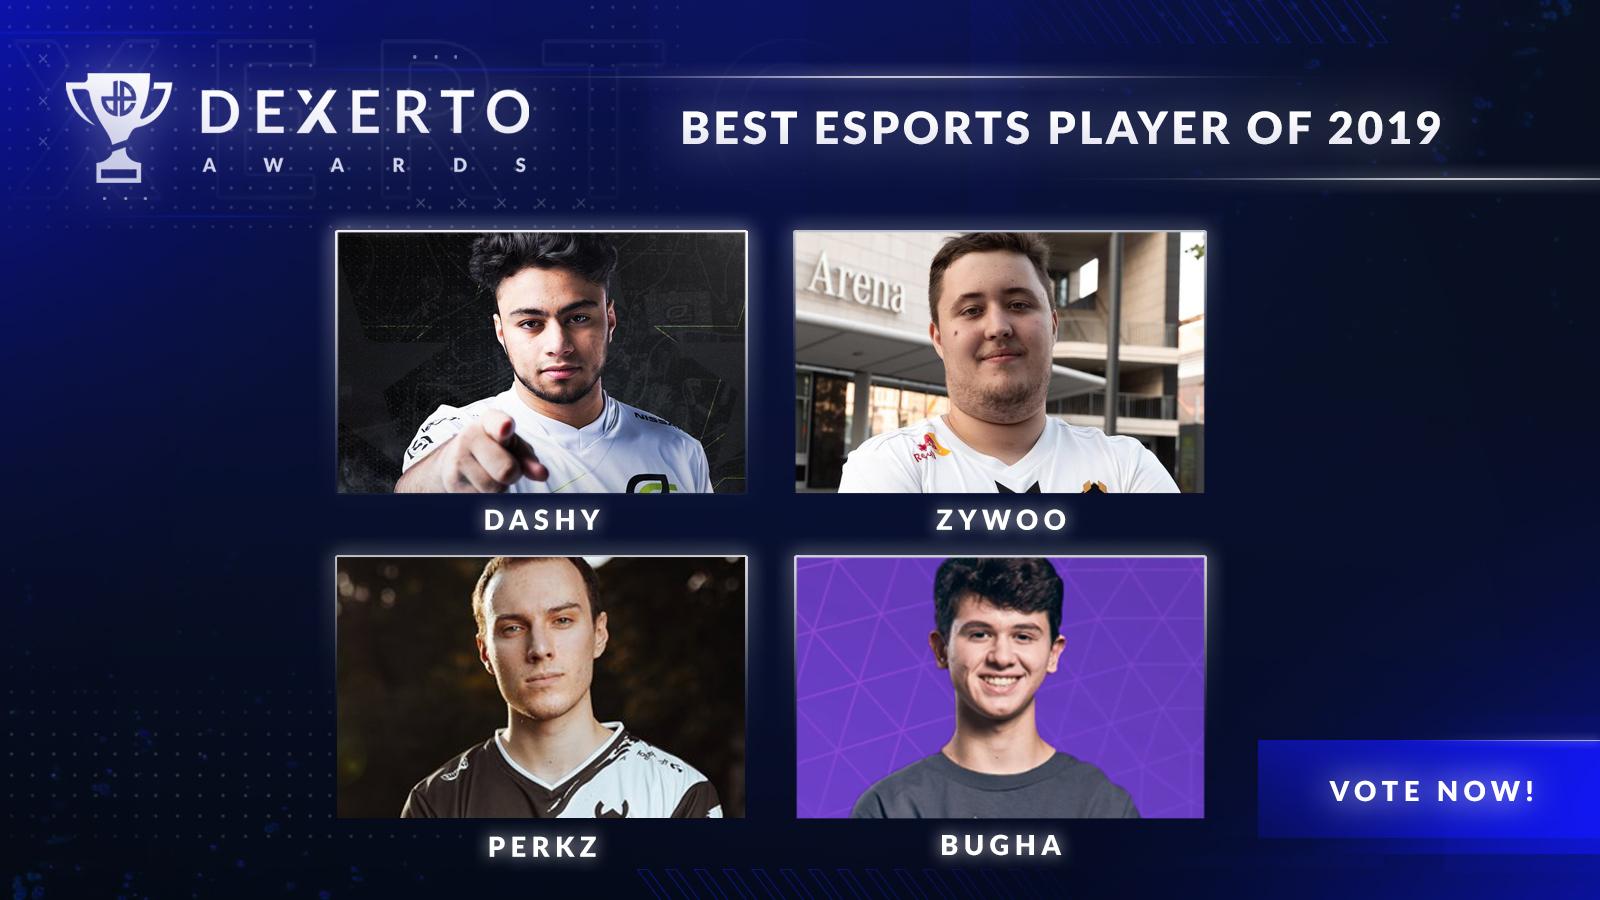 The best esports players of 2019